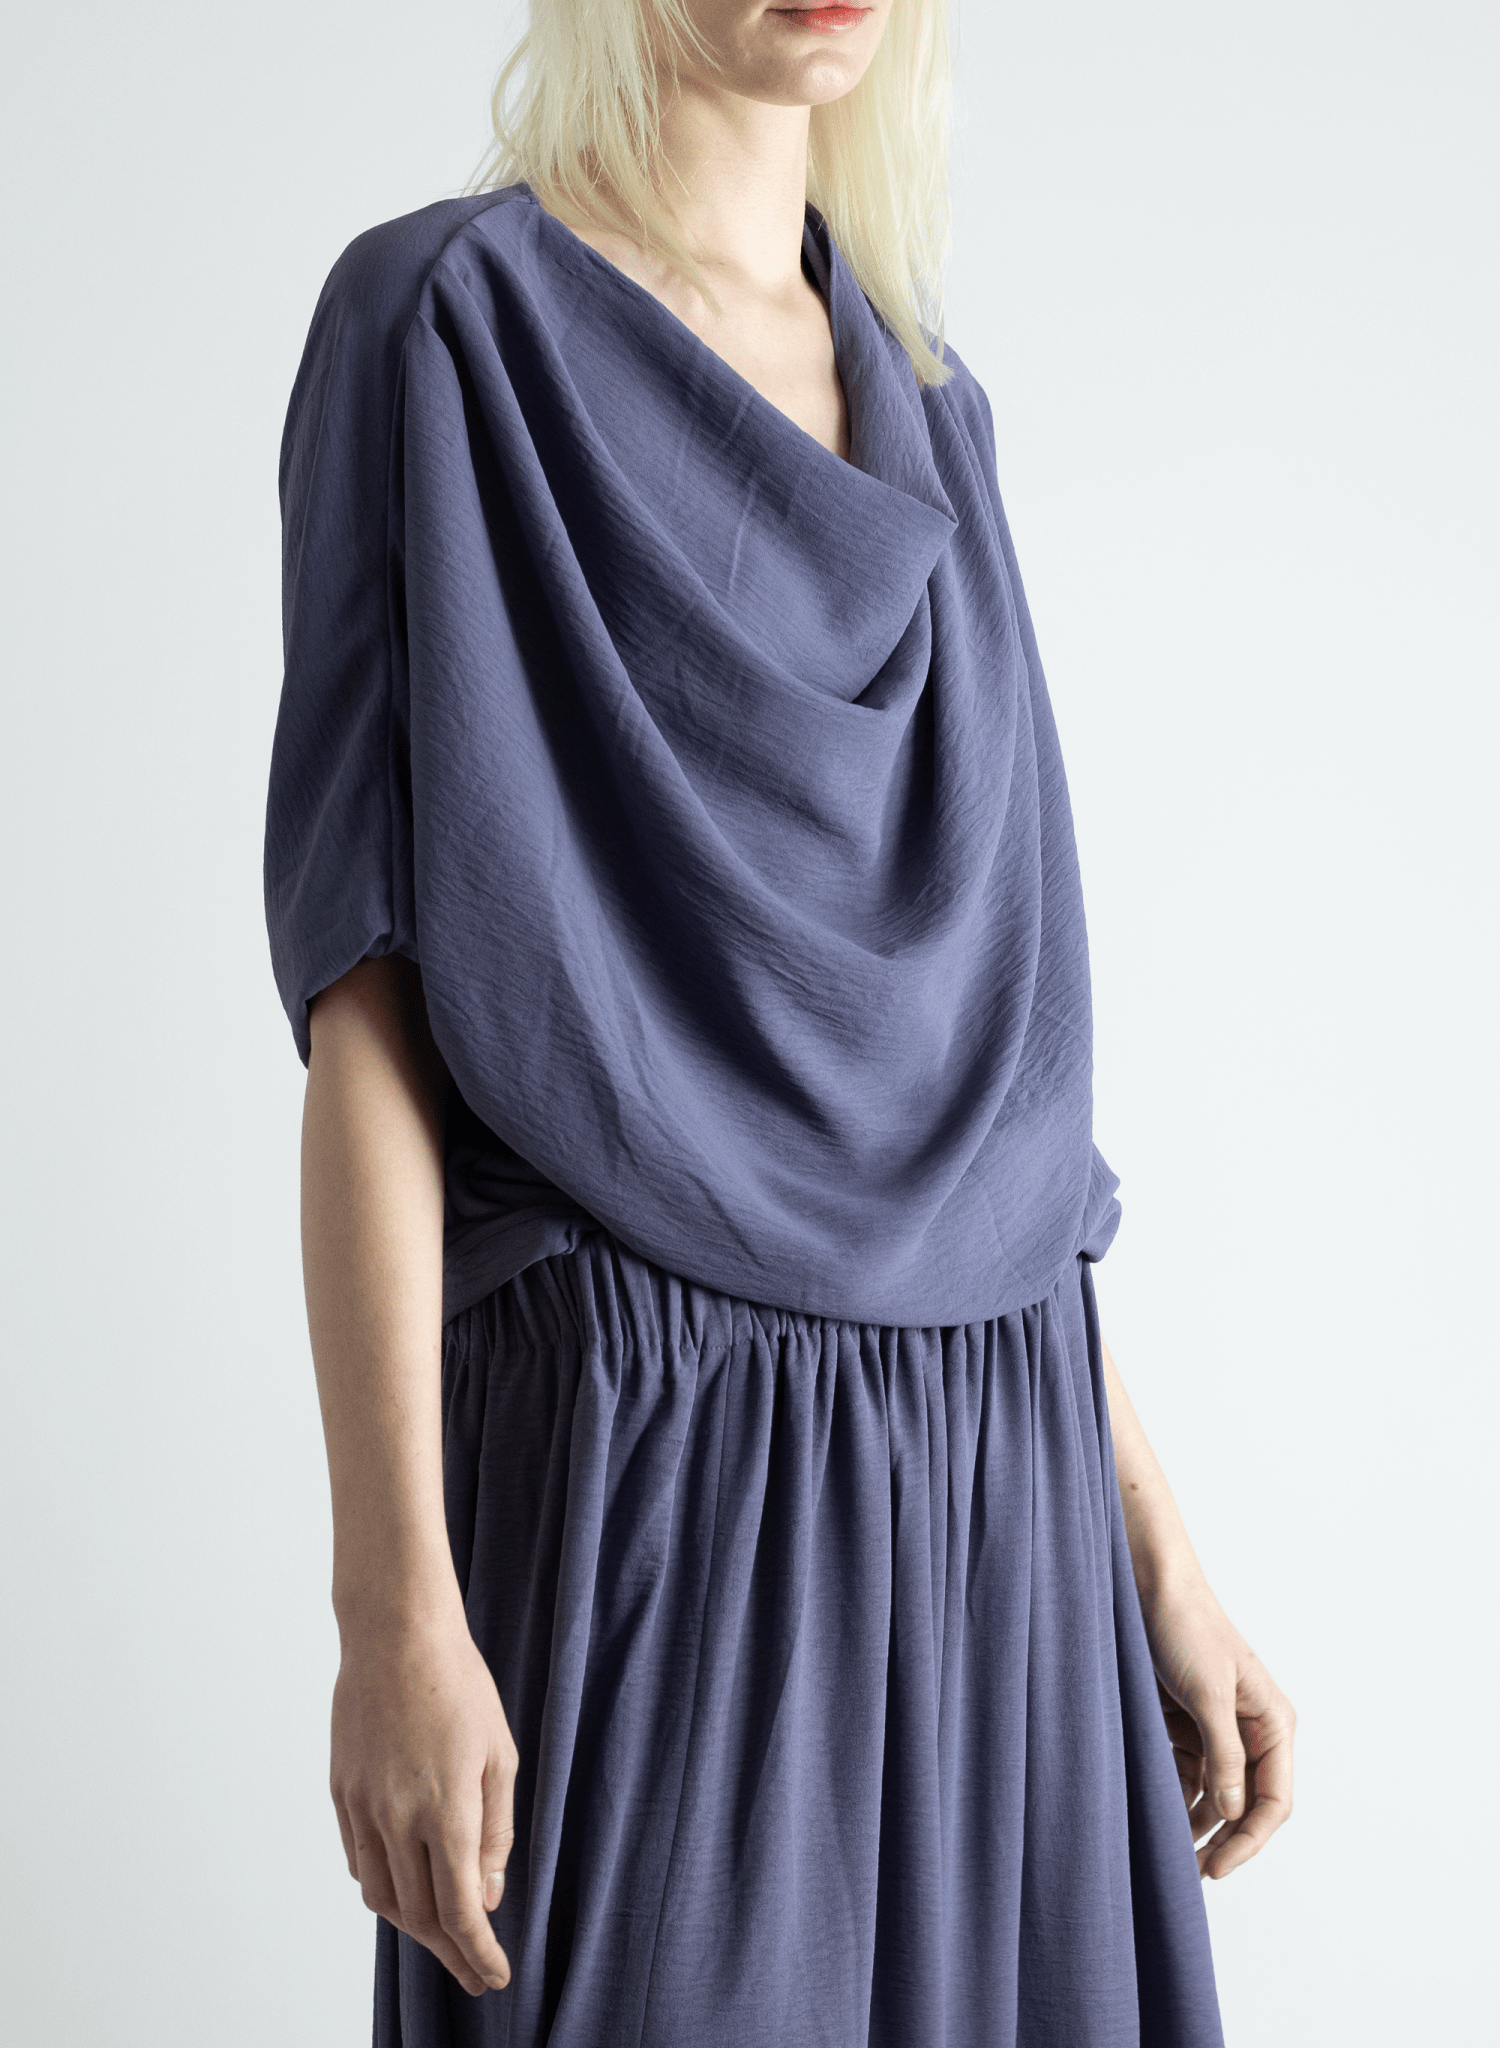 Abstraction Cowl Top - Lilac - Meg